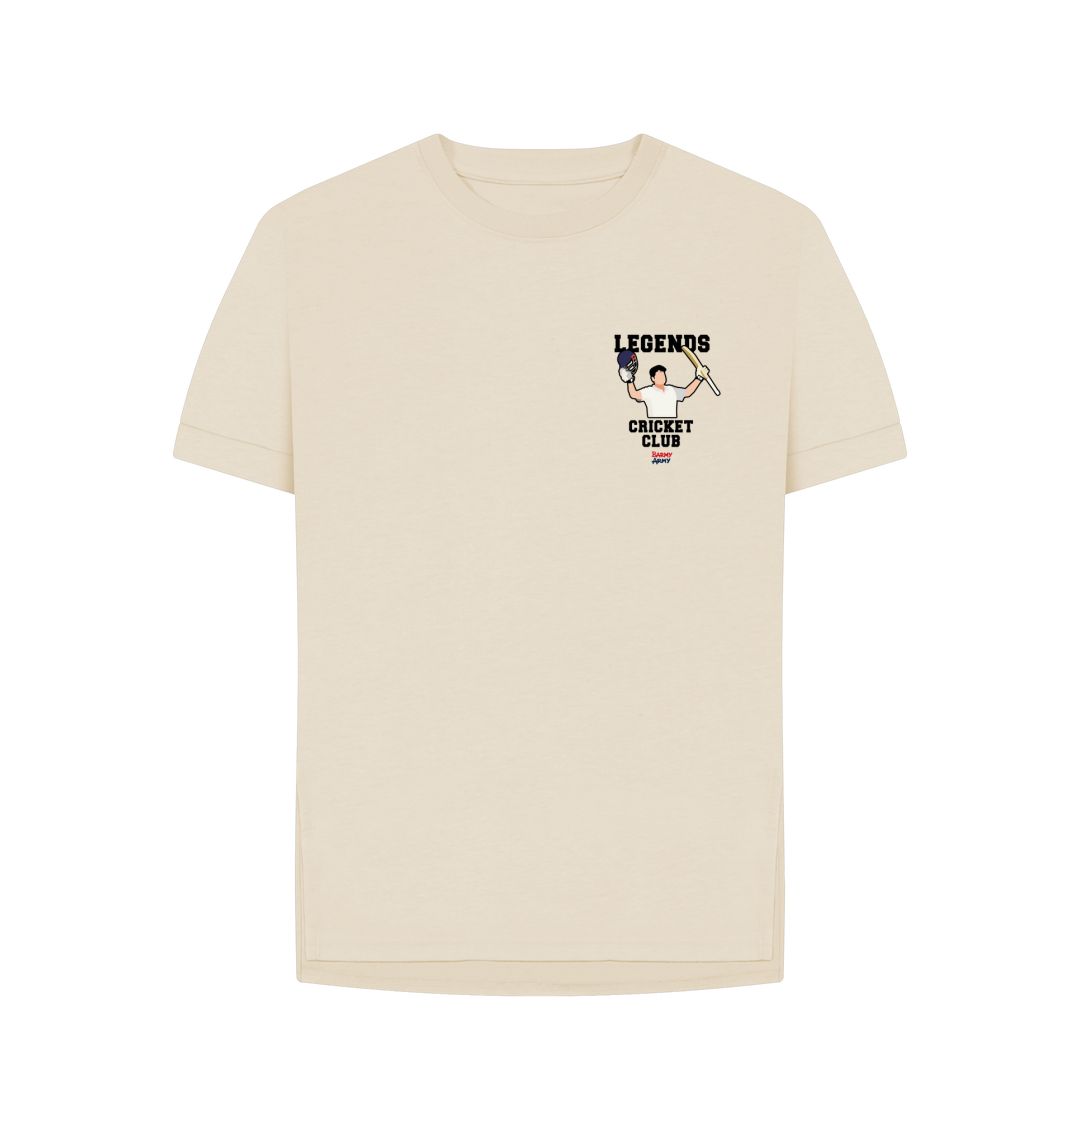 Oat Barmy Army Legends Cricket Club Ladies Tee - Cook